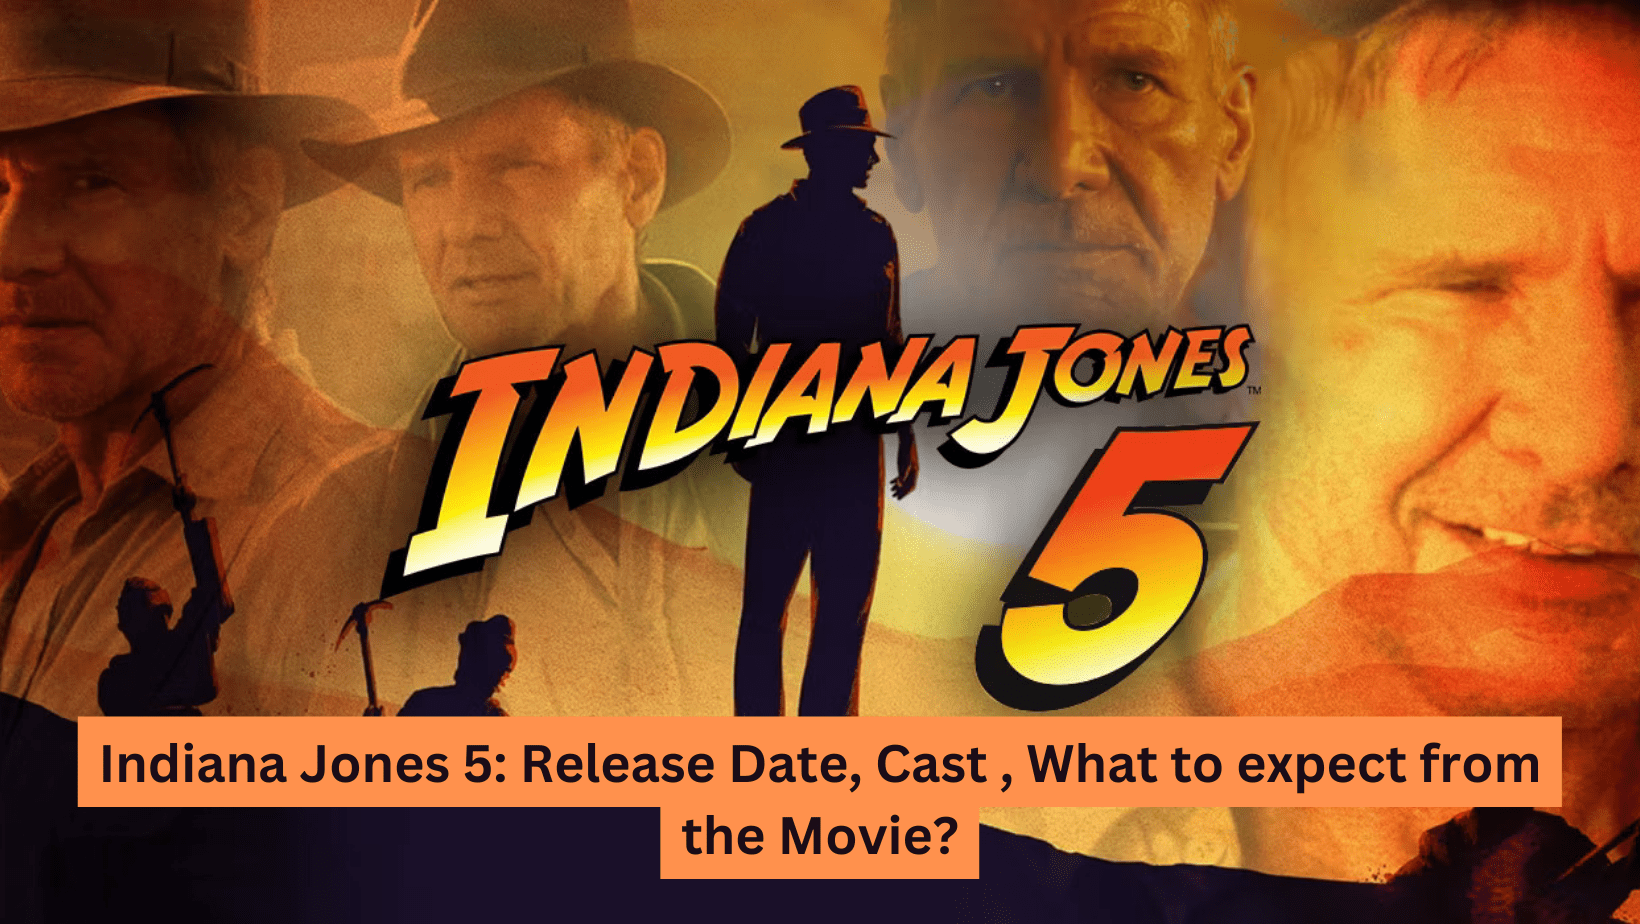 Indiana Jones 5: Release Date, Cast , What to expect from the Movie?